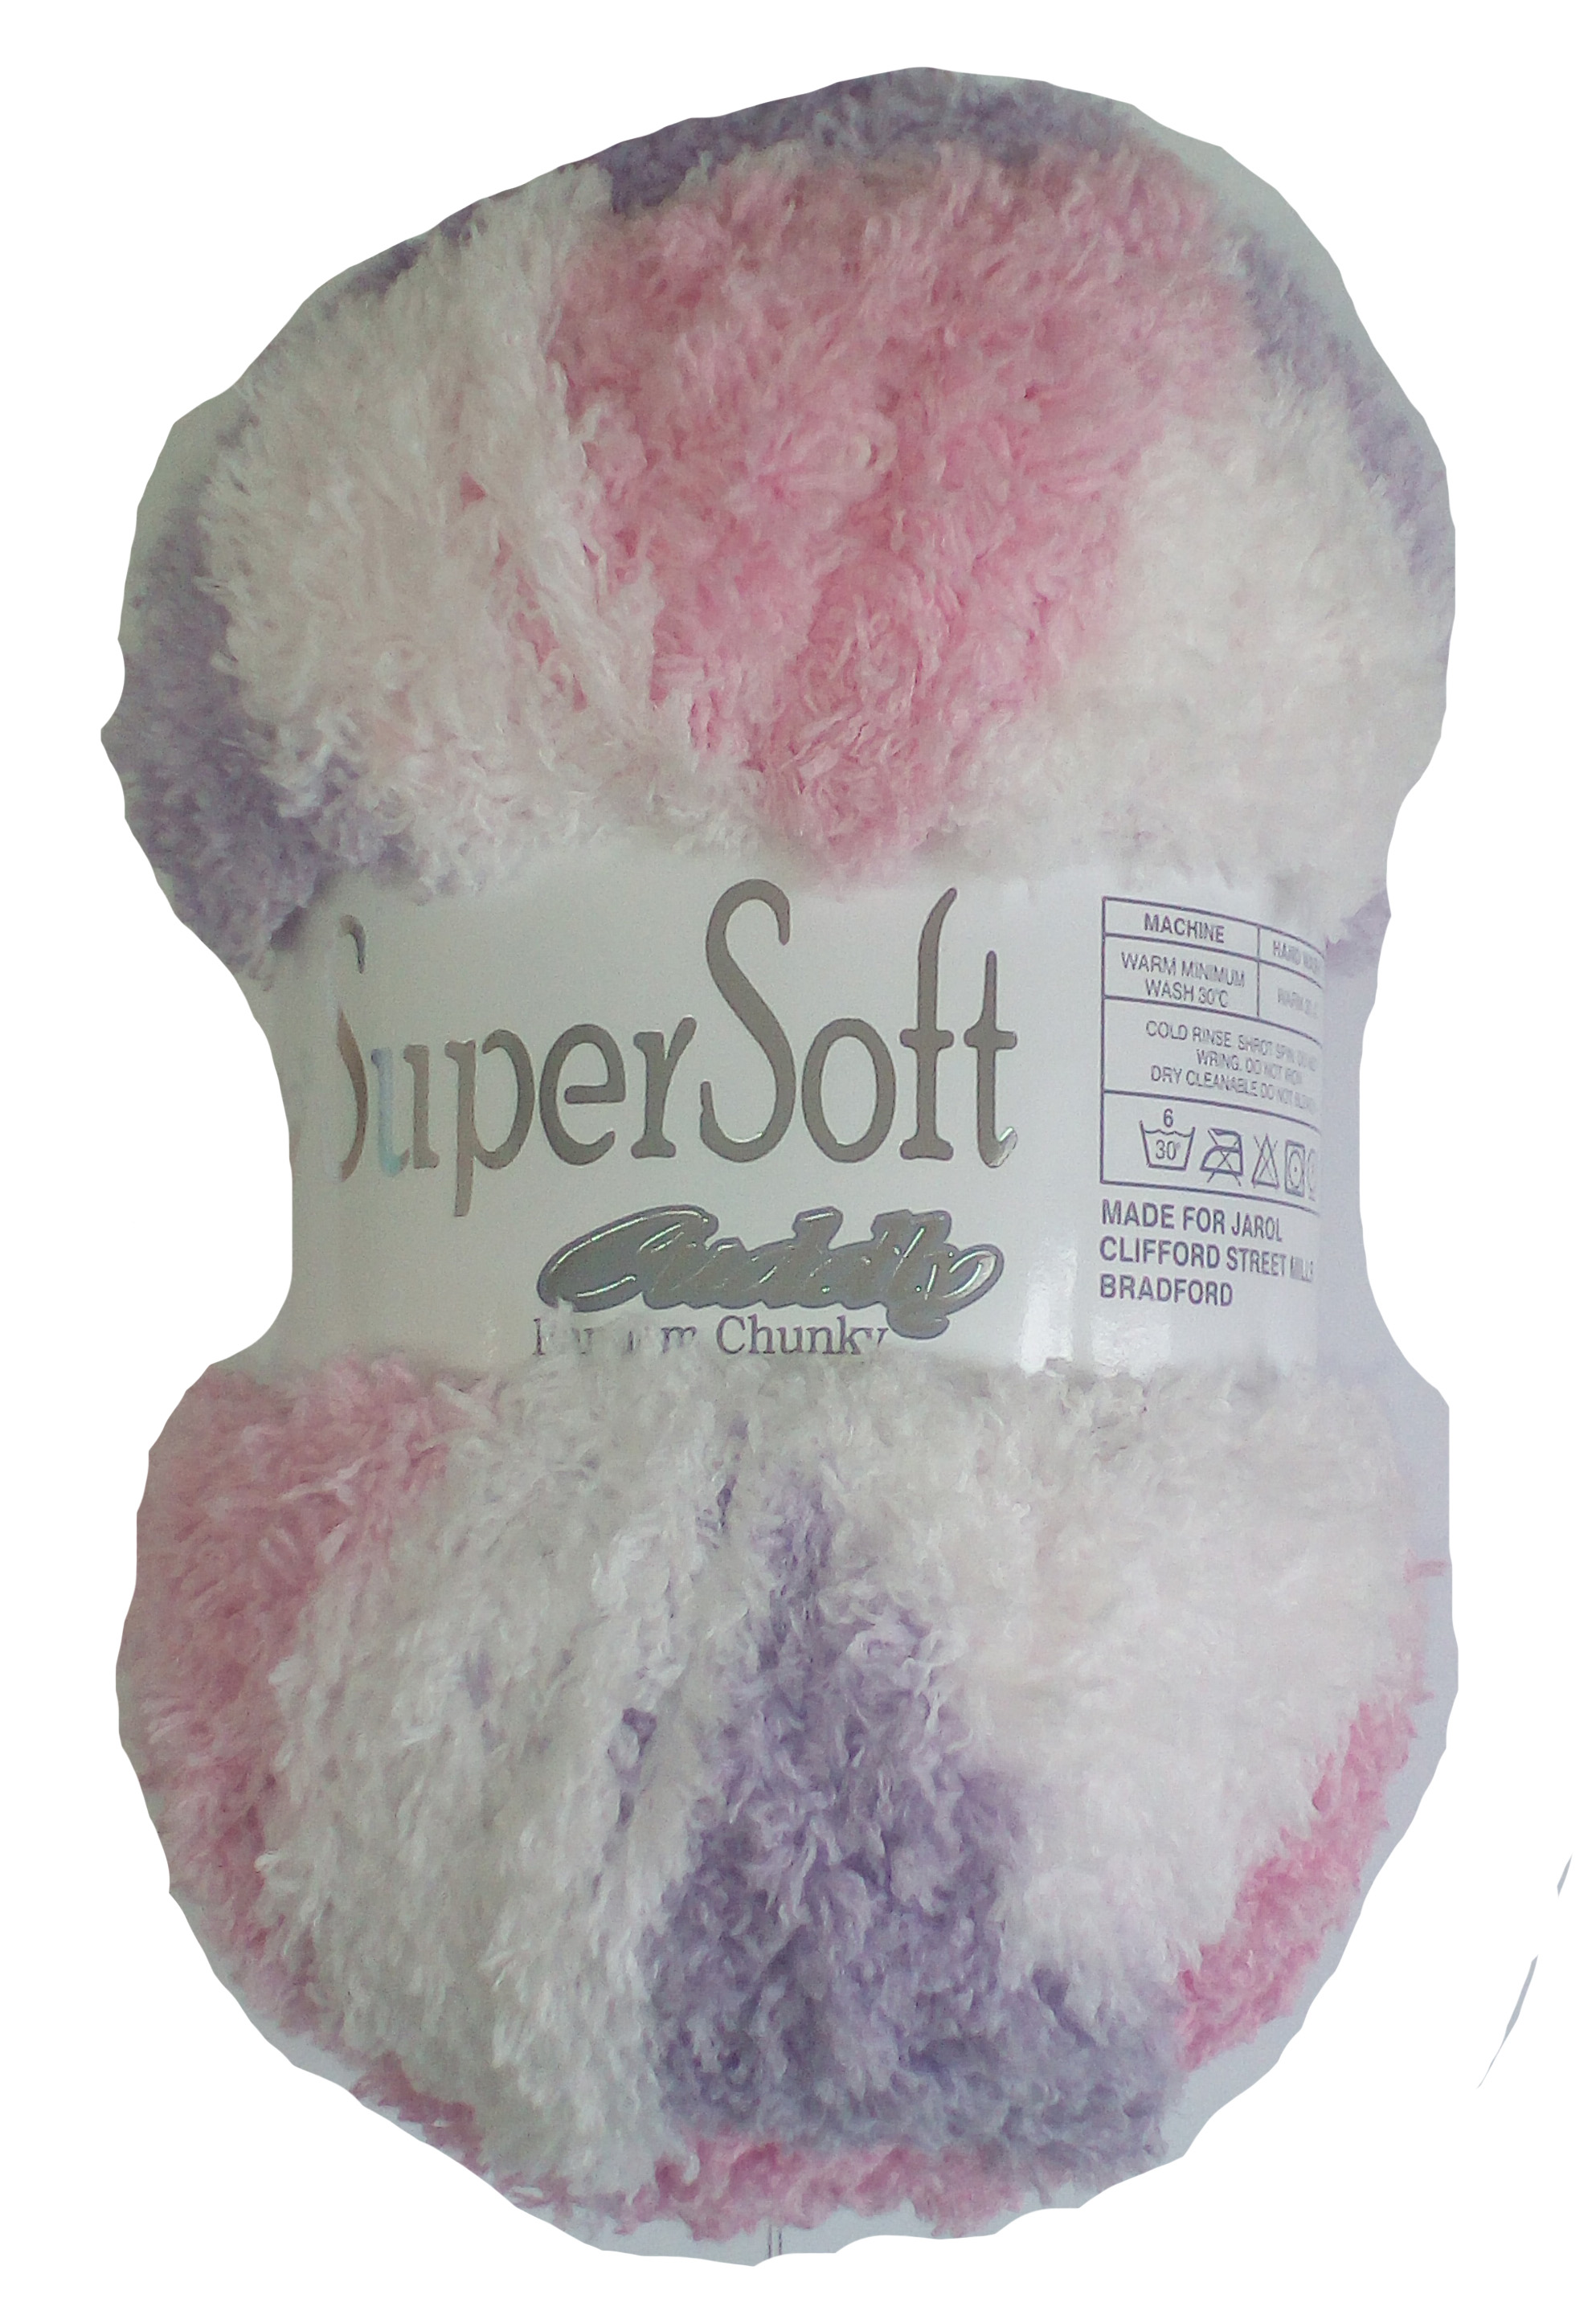 Super Soft Cuddly Yarn Cassis - Click Image to Close